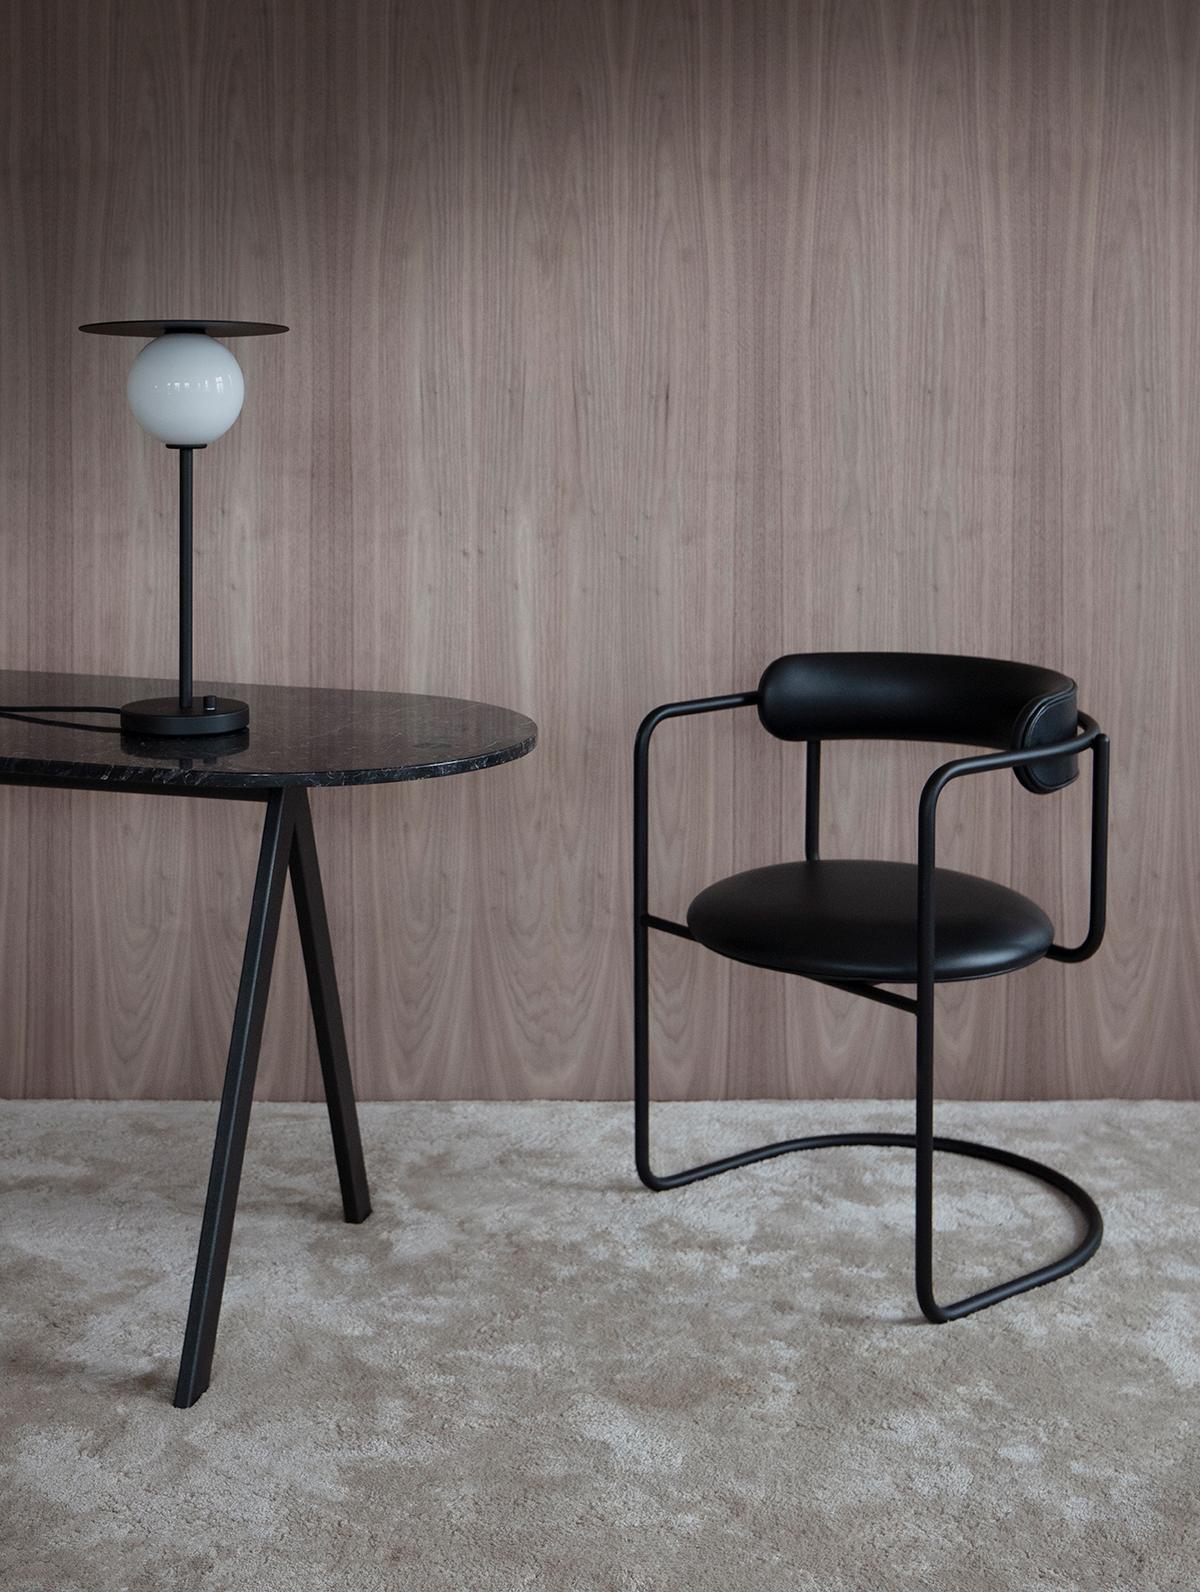 FF Cantilever, chair 
Design: Friends & Founders

Upholstery available in a wide range of fabrics and leathers
Model shown (fabric): Nevotex, Dakar 0842

Legs: 
4 legs or cantilever
Black steel or chrome

Back:
Round or Cubic


Price